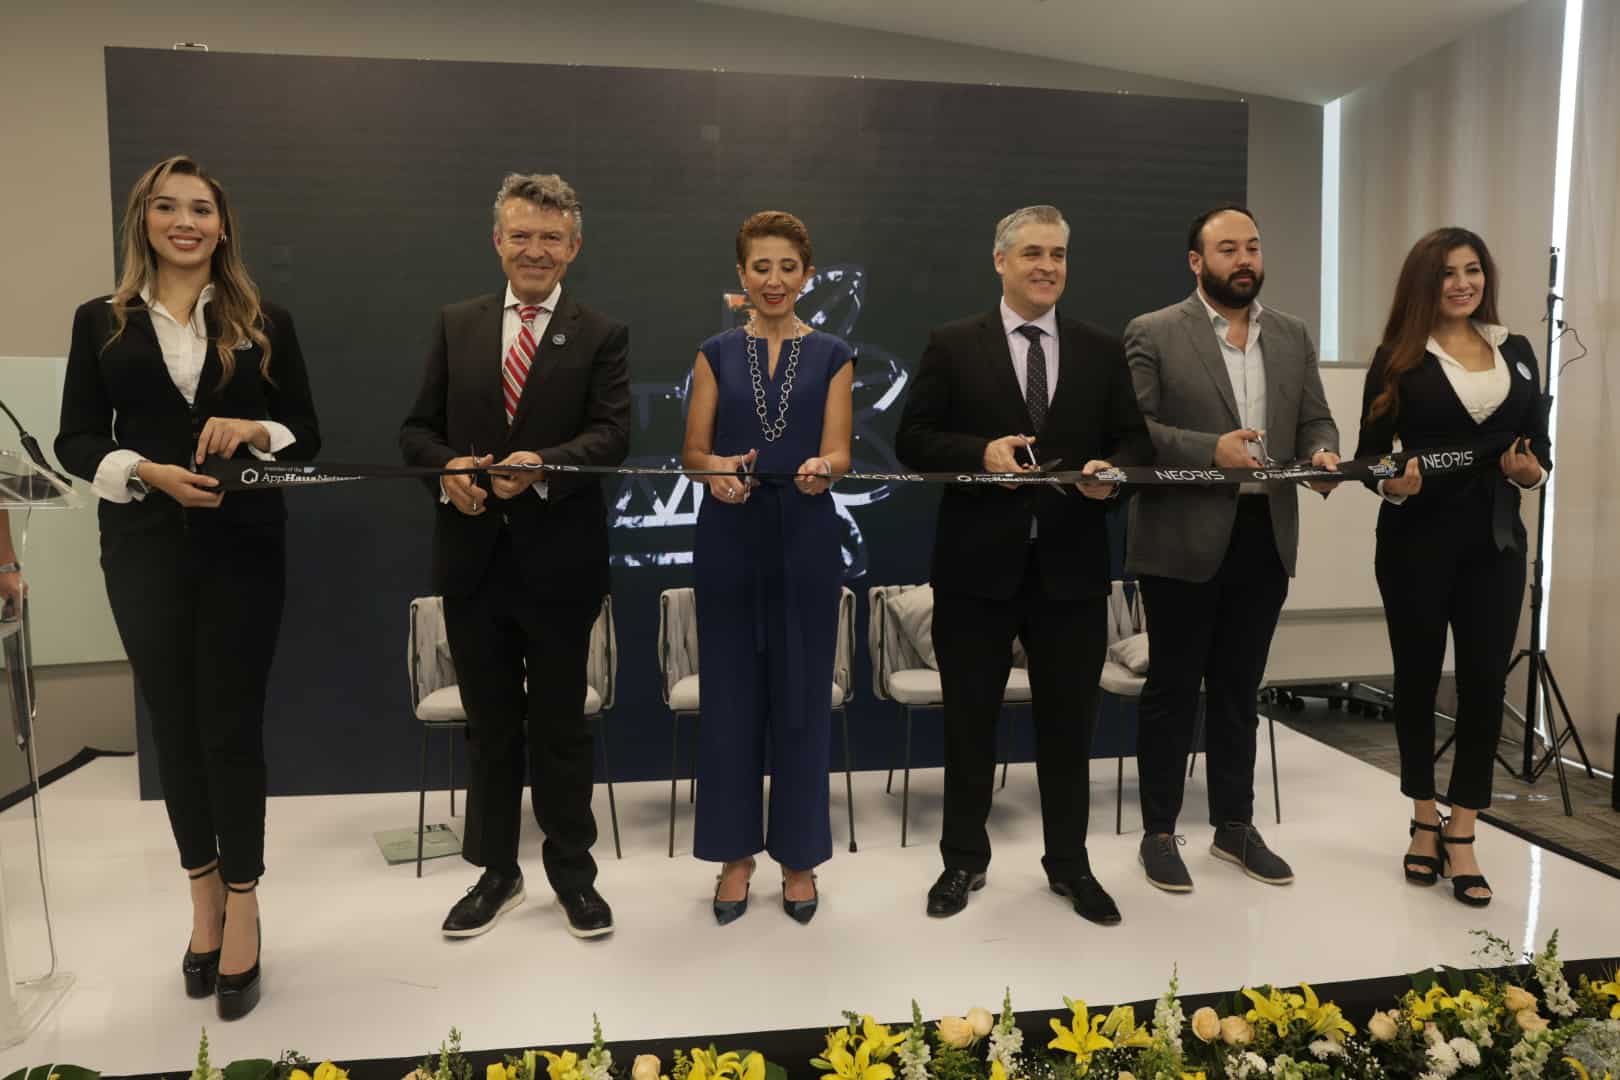 NEORIS and SAP, leading companies in digital transformation and enterprise software development, joined forces to launch AppHaus in Mexico.